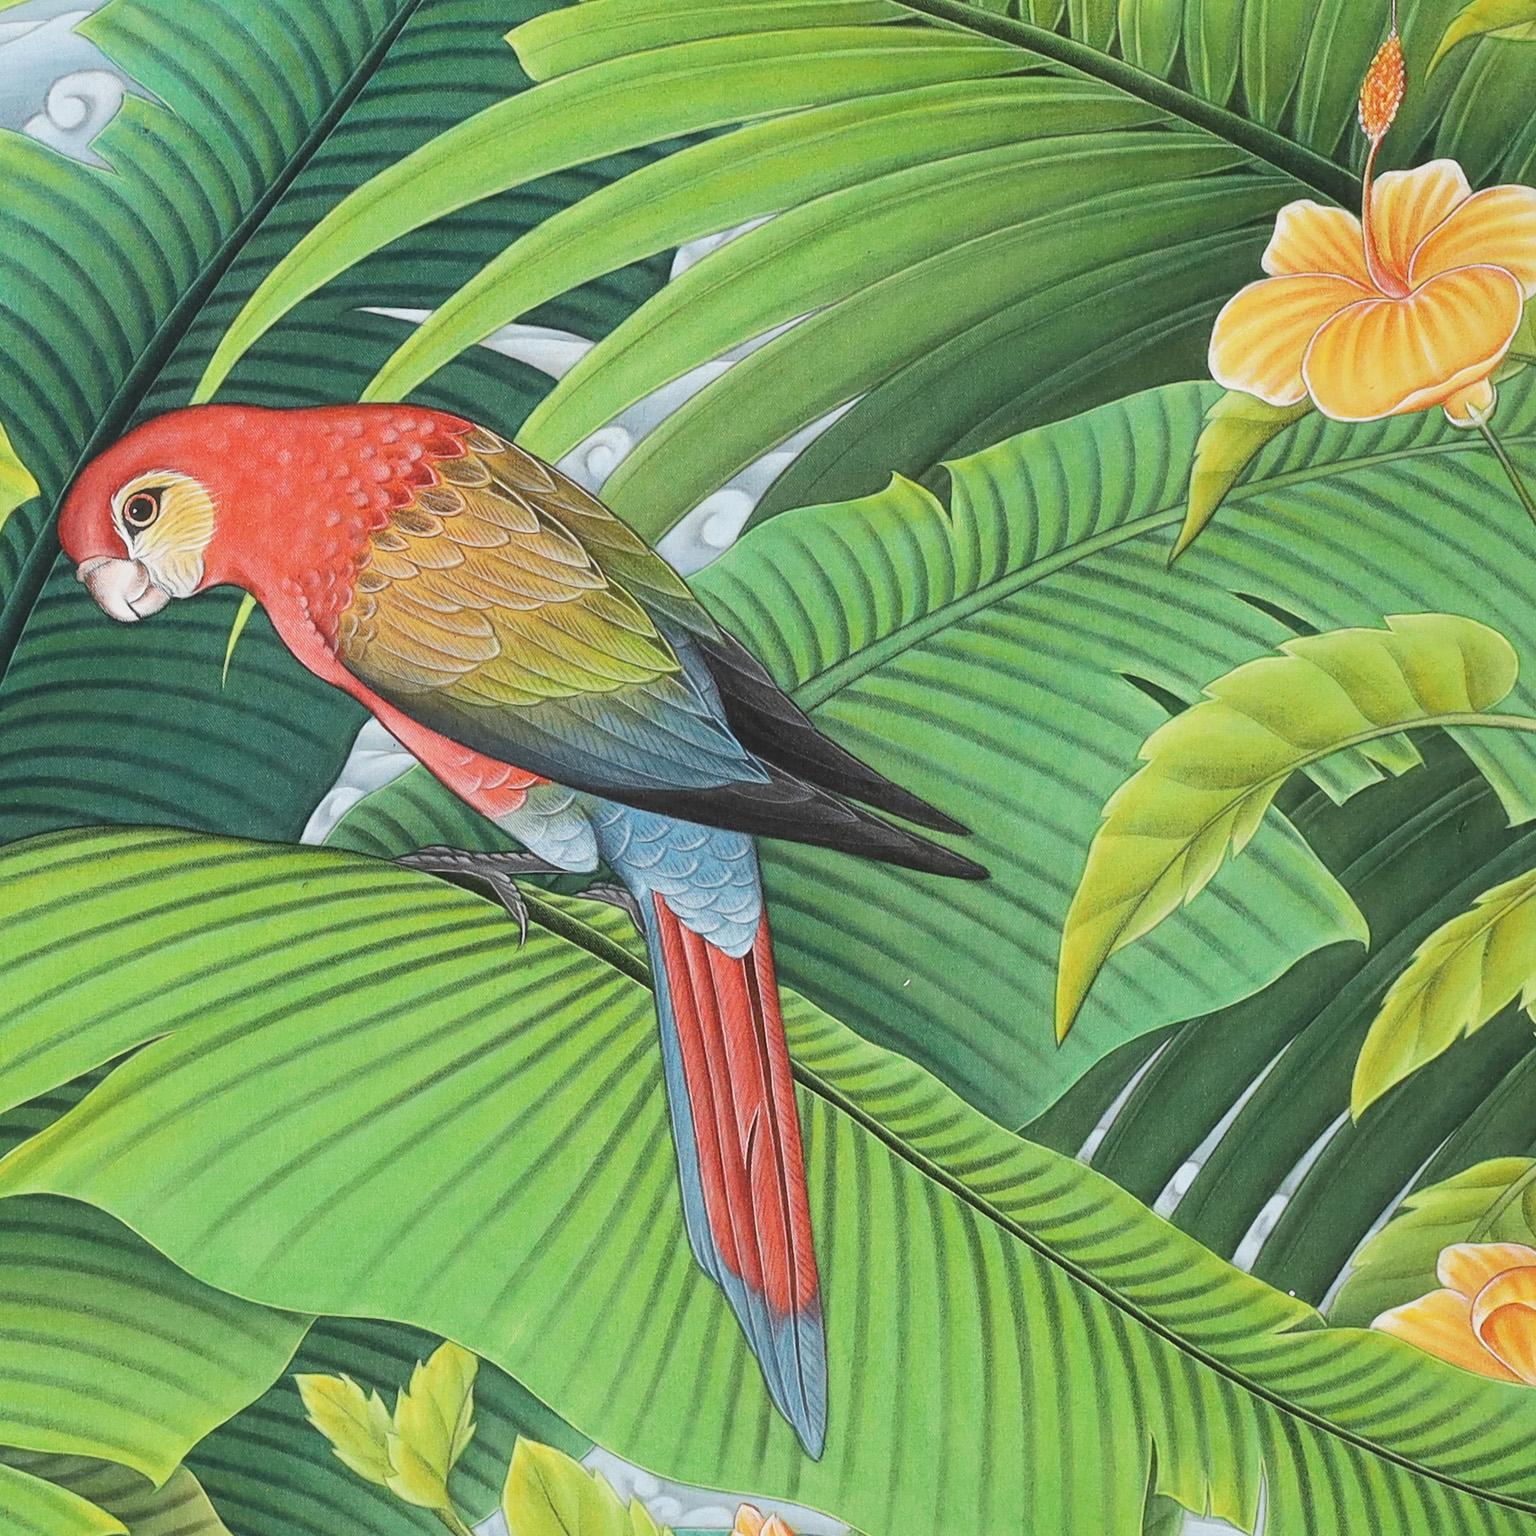 Painting on Canvas with Parrots and Flowers 1